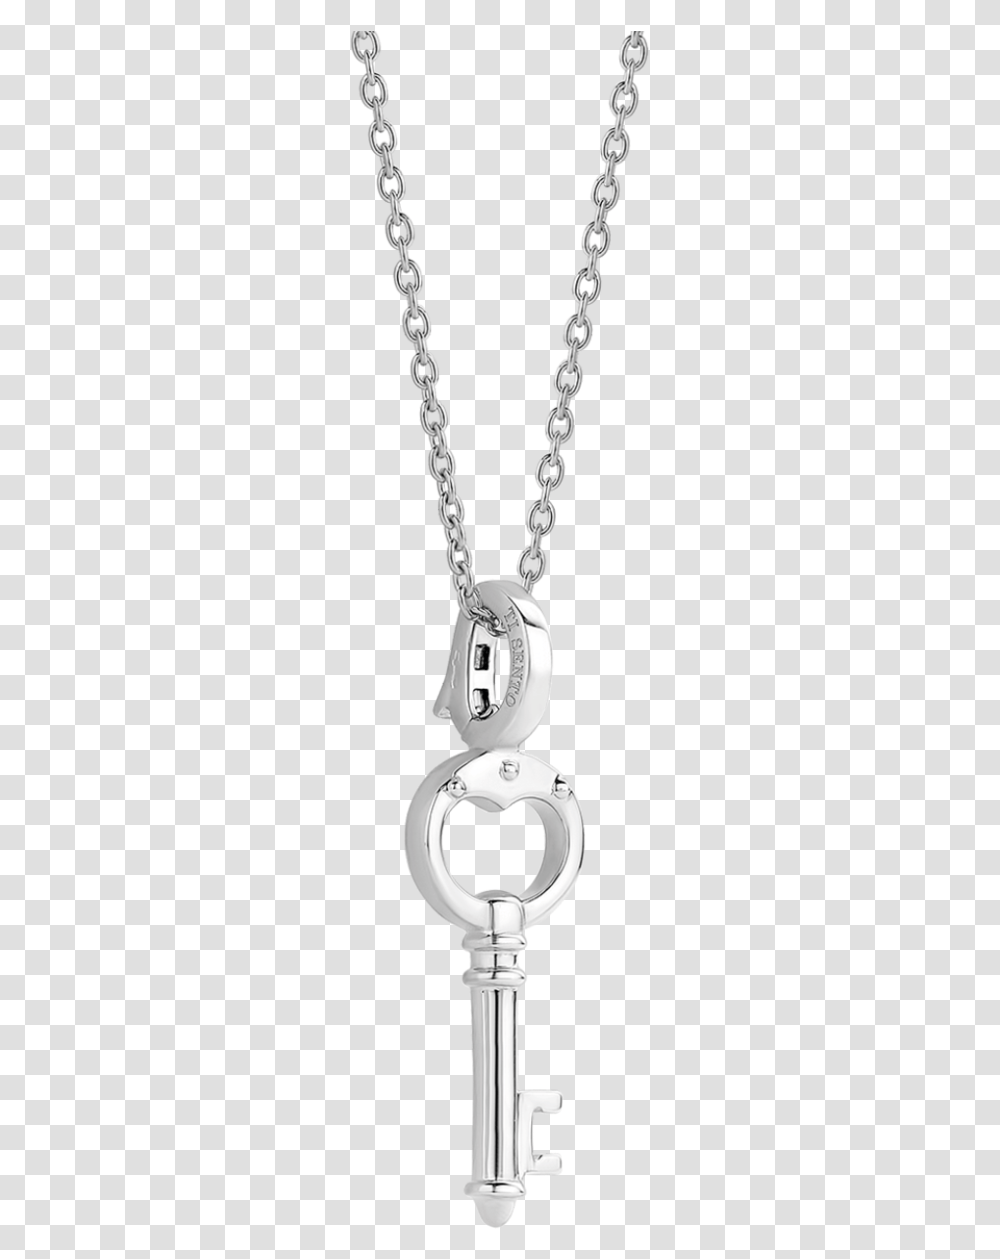 Jewellery Model, Pendant, Necklace, Jewelry, Accessories Transparent Png